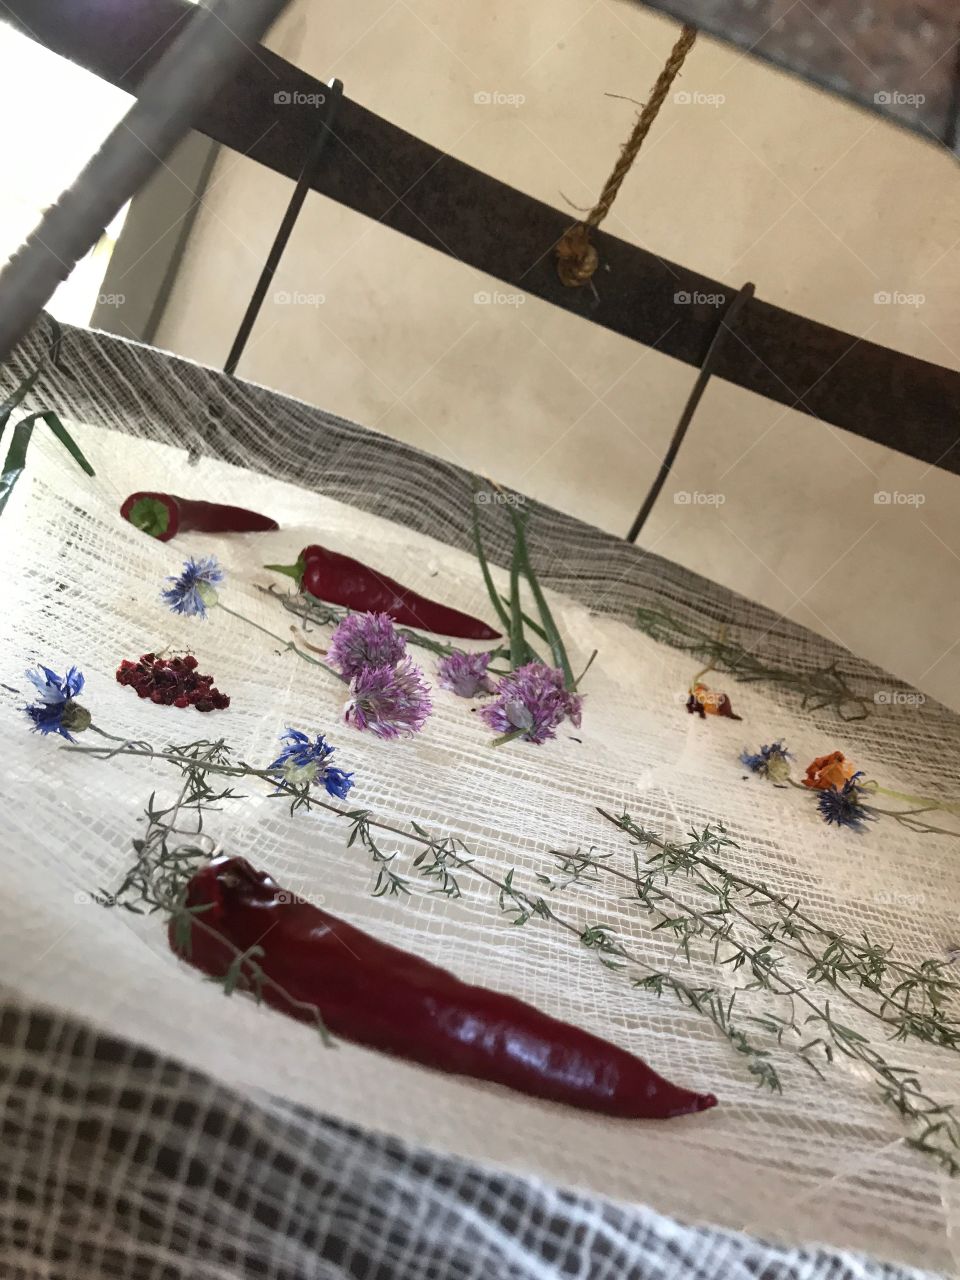 Fresh Handpicked Herbs and Flowers Drying on a Cheesecloth Rack - Dehydrating Plants the Old Fashioned Way - Open Air Livning History Museun Old World Wisconsin 